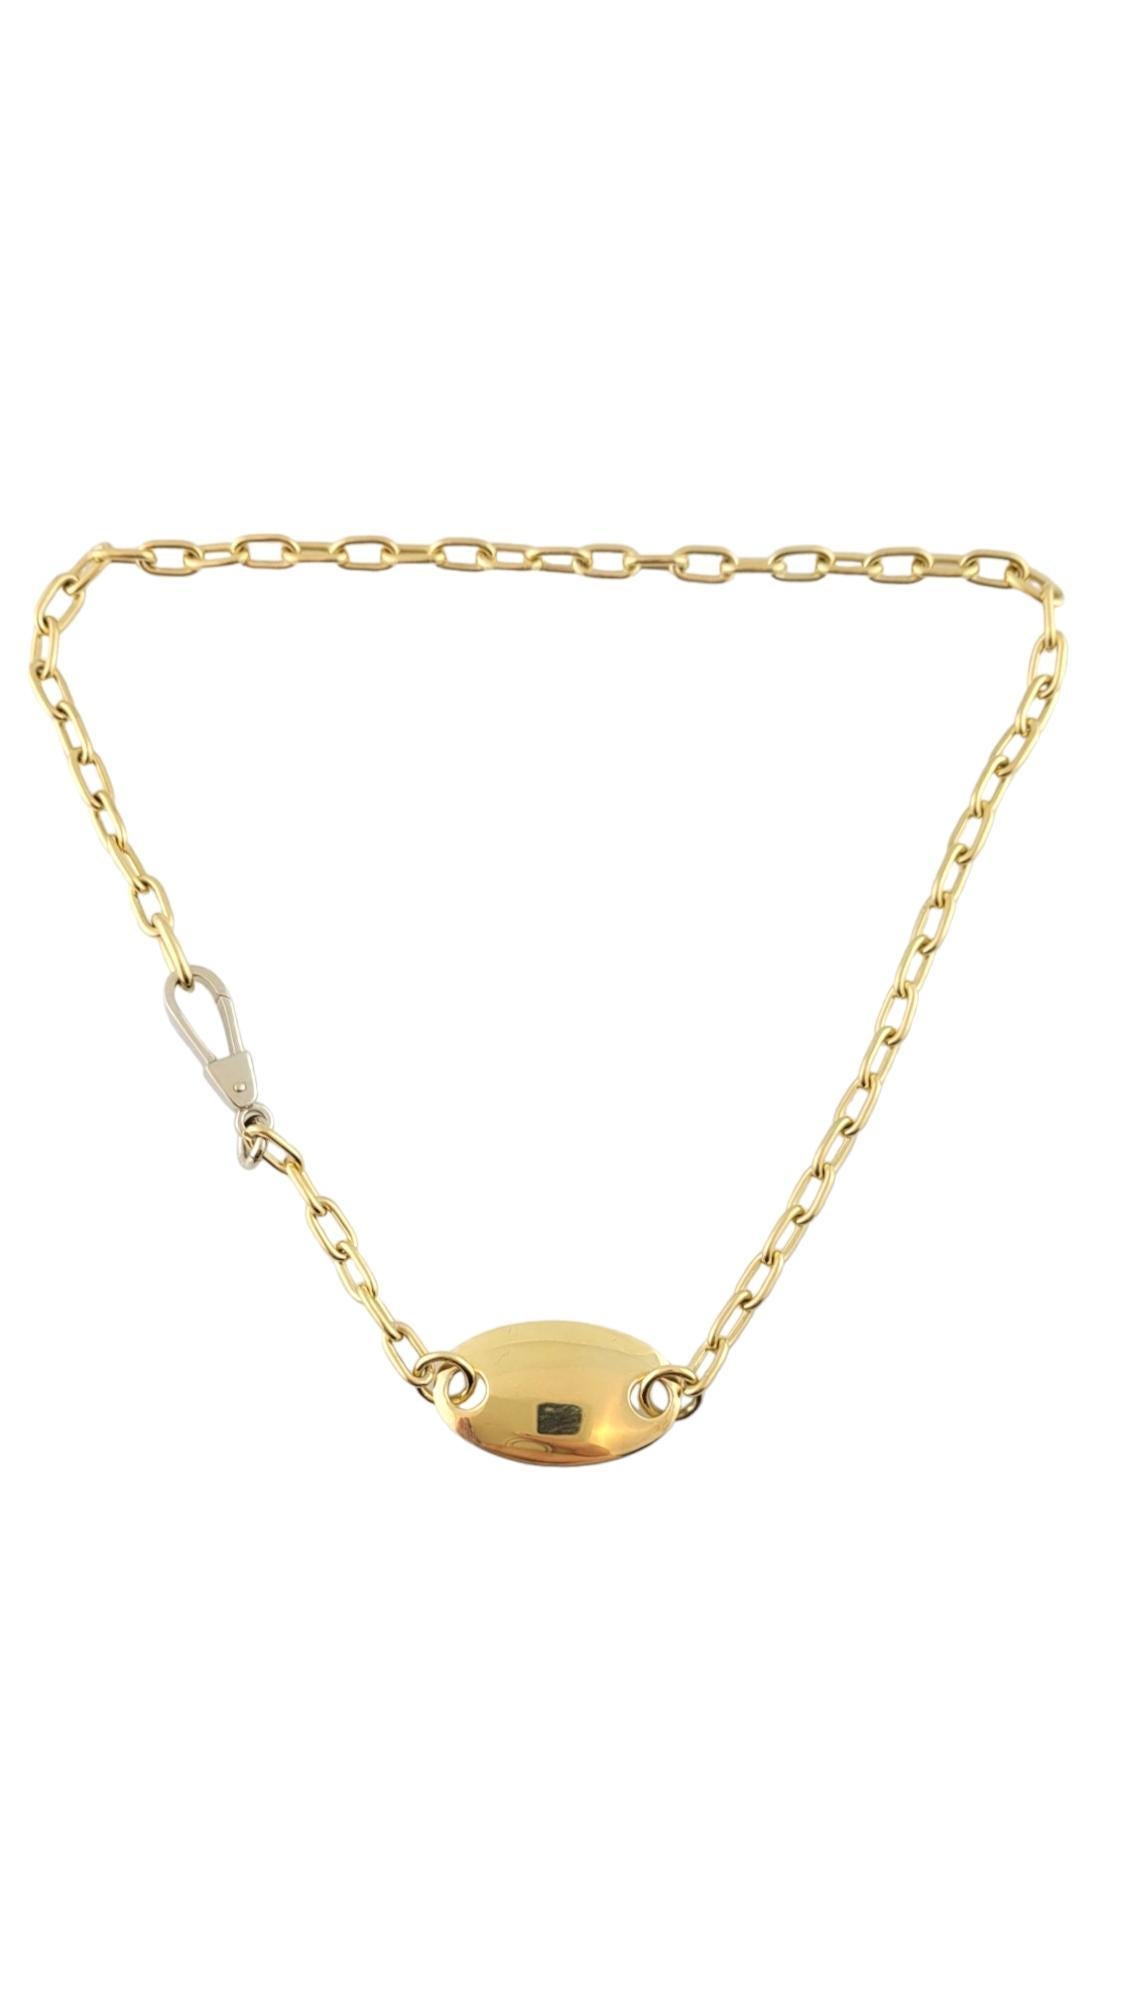 18K Yellow Gold Pomellato ID Chain Link Necklace #16123 For Sale